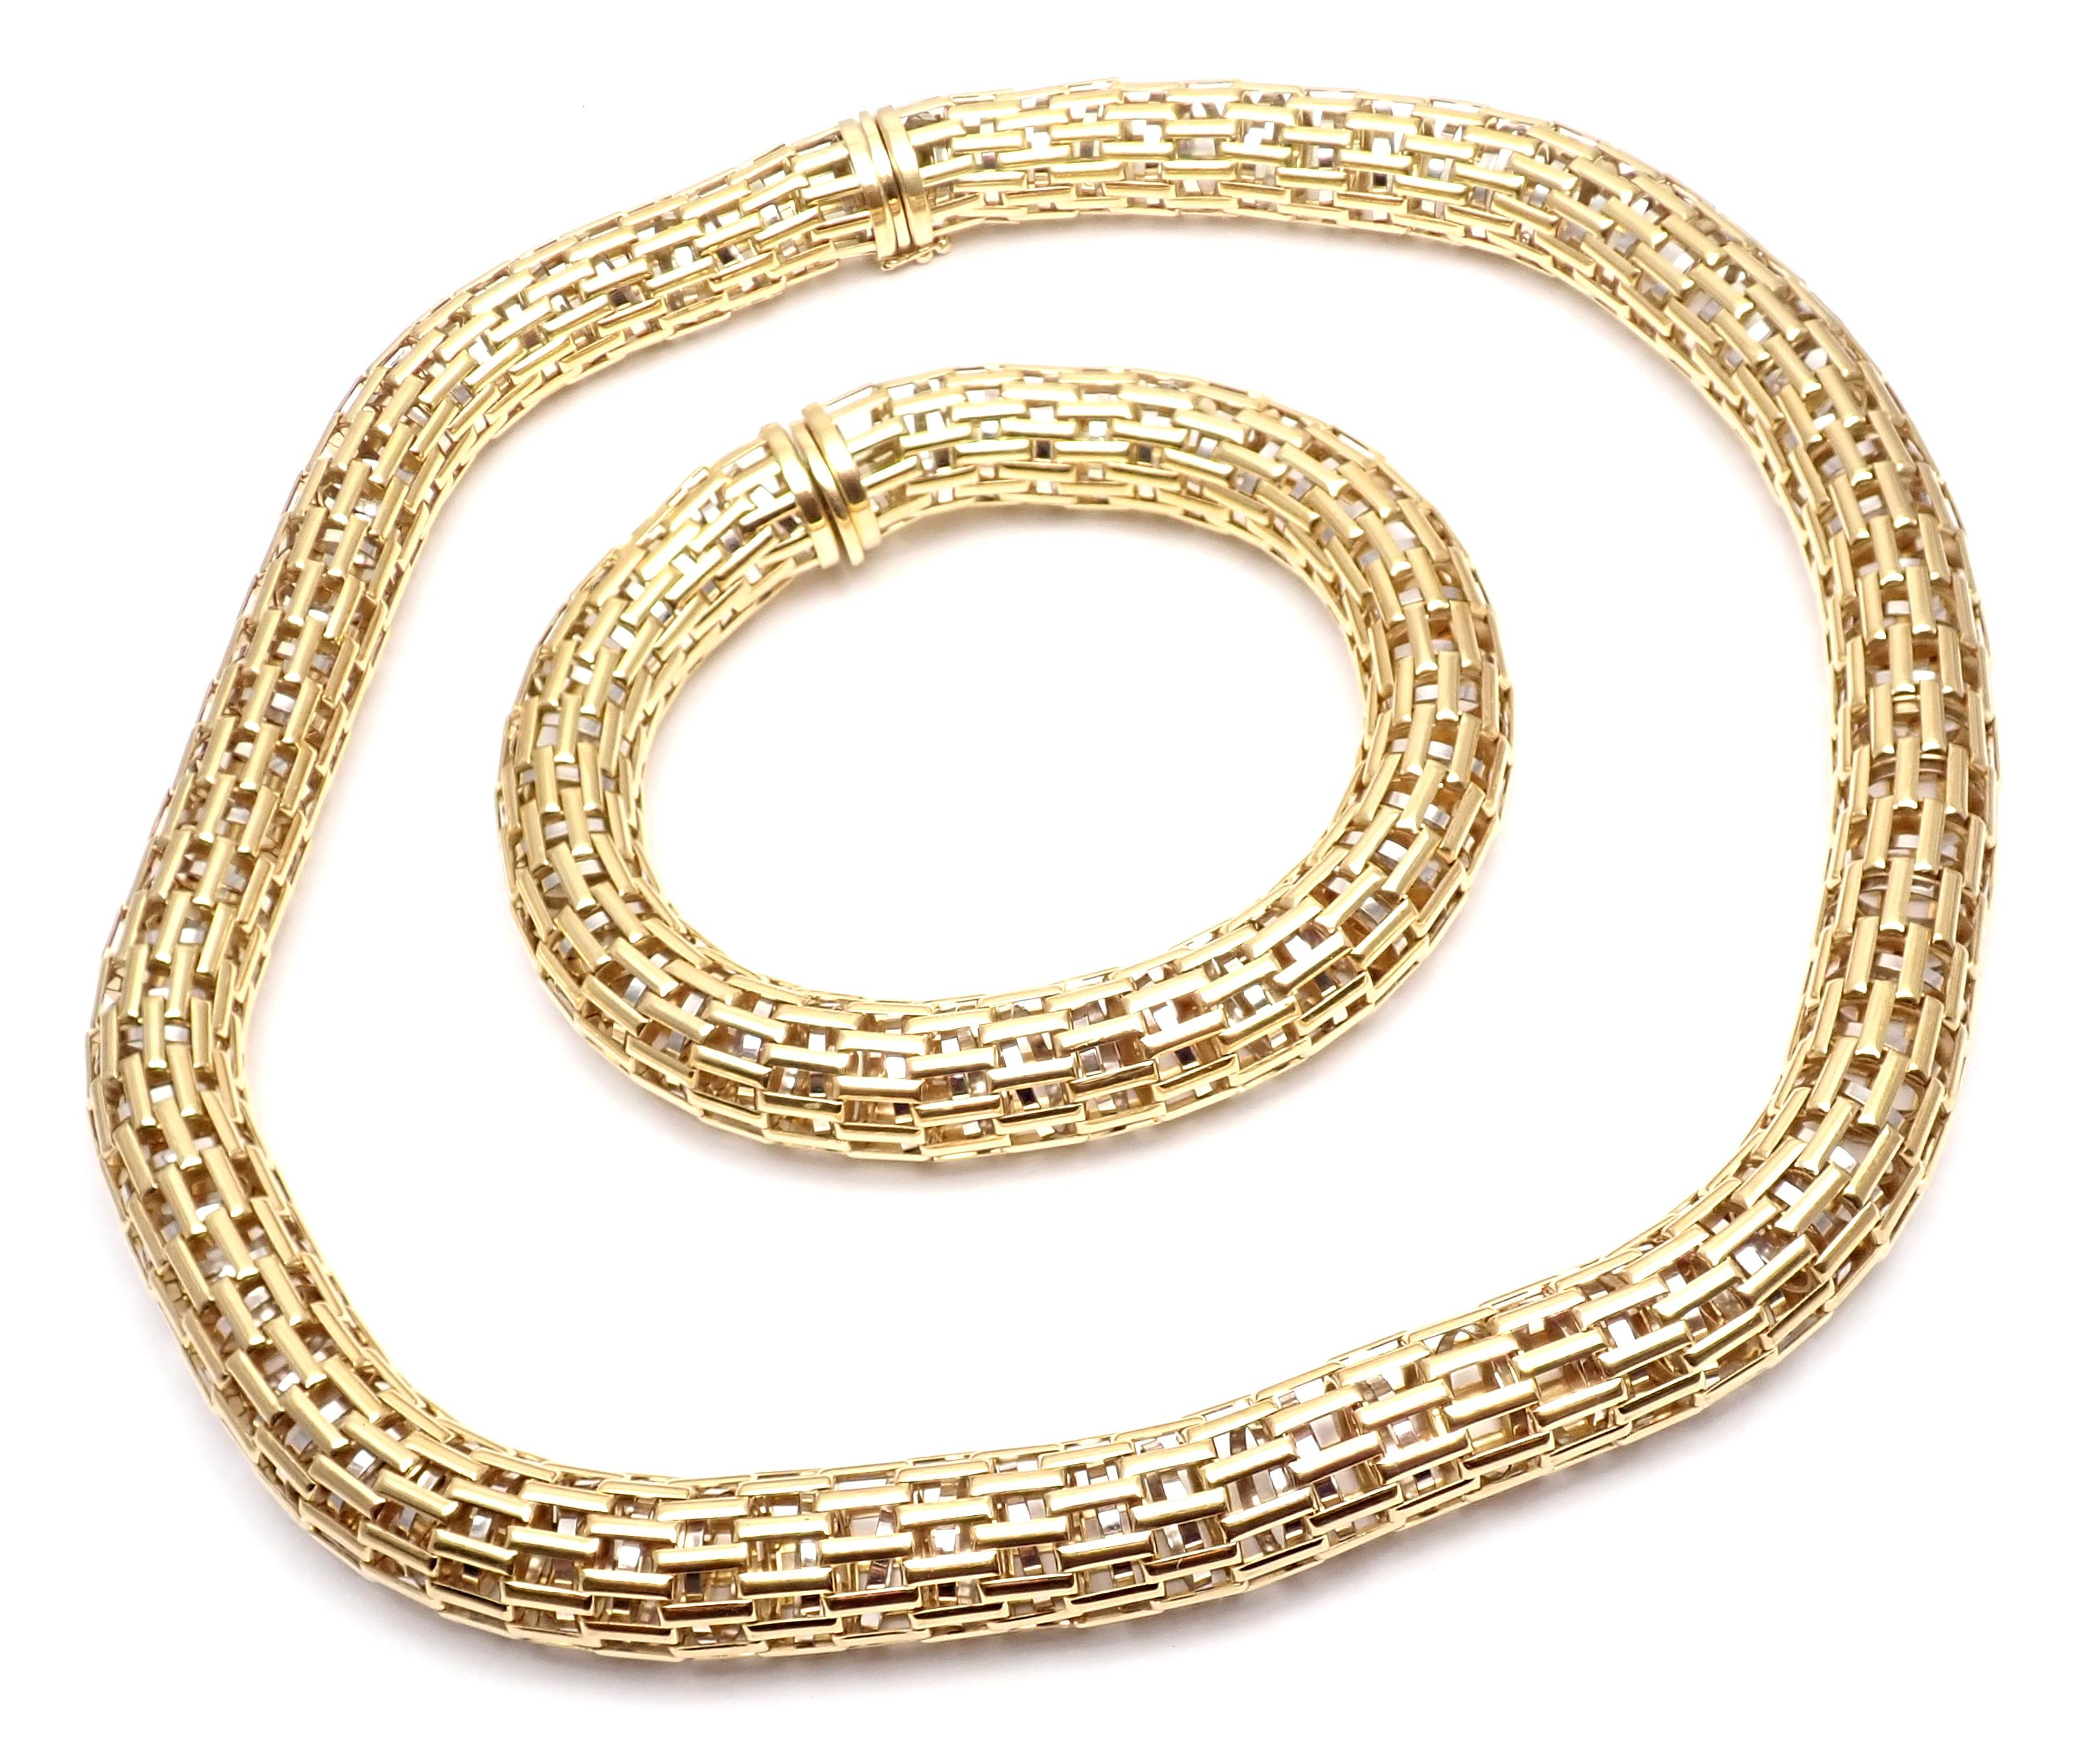 18k Yellow Gold Mesh Bracelet And Necklace by FOPE Italy.
Details: 
Chain Length: 18